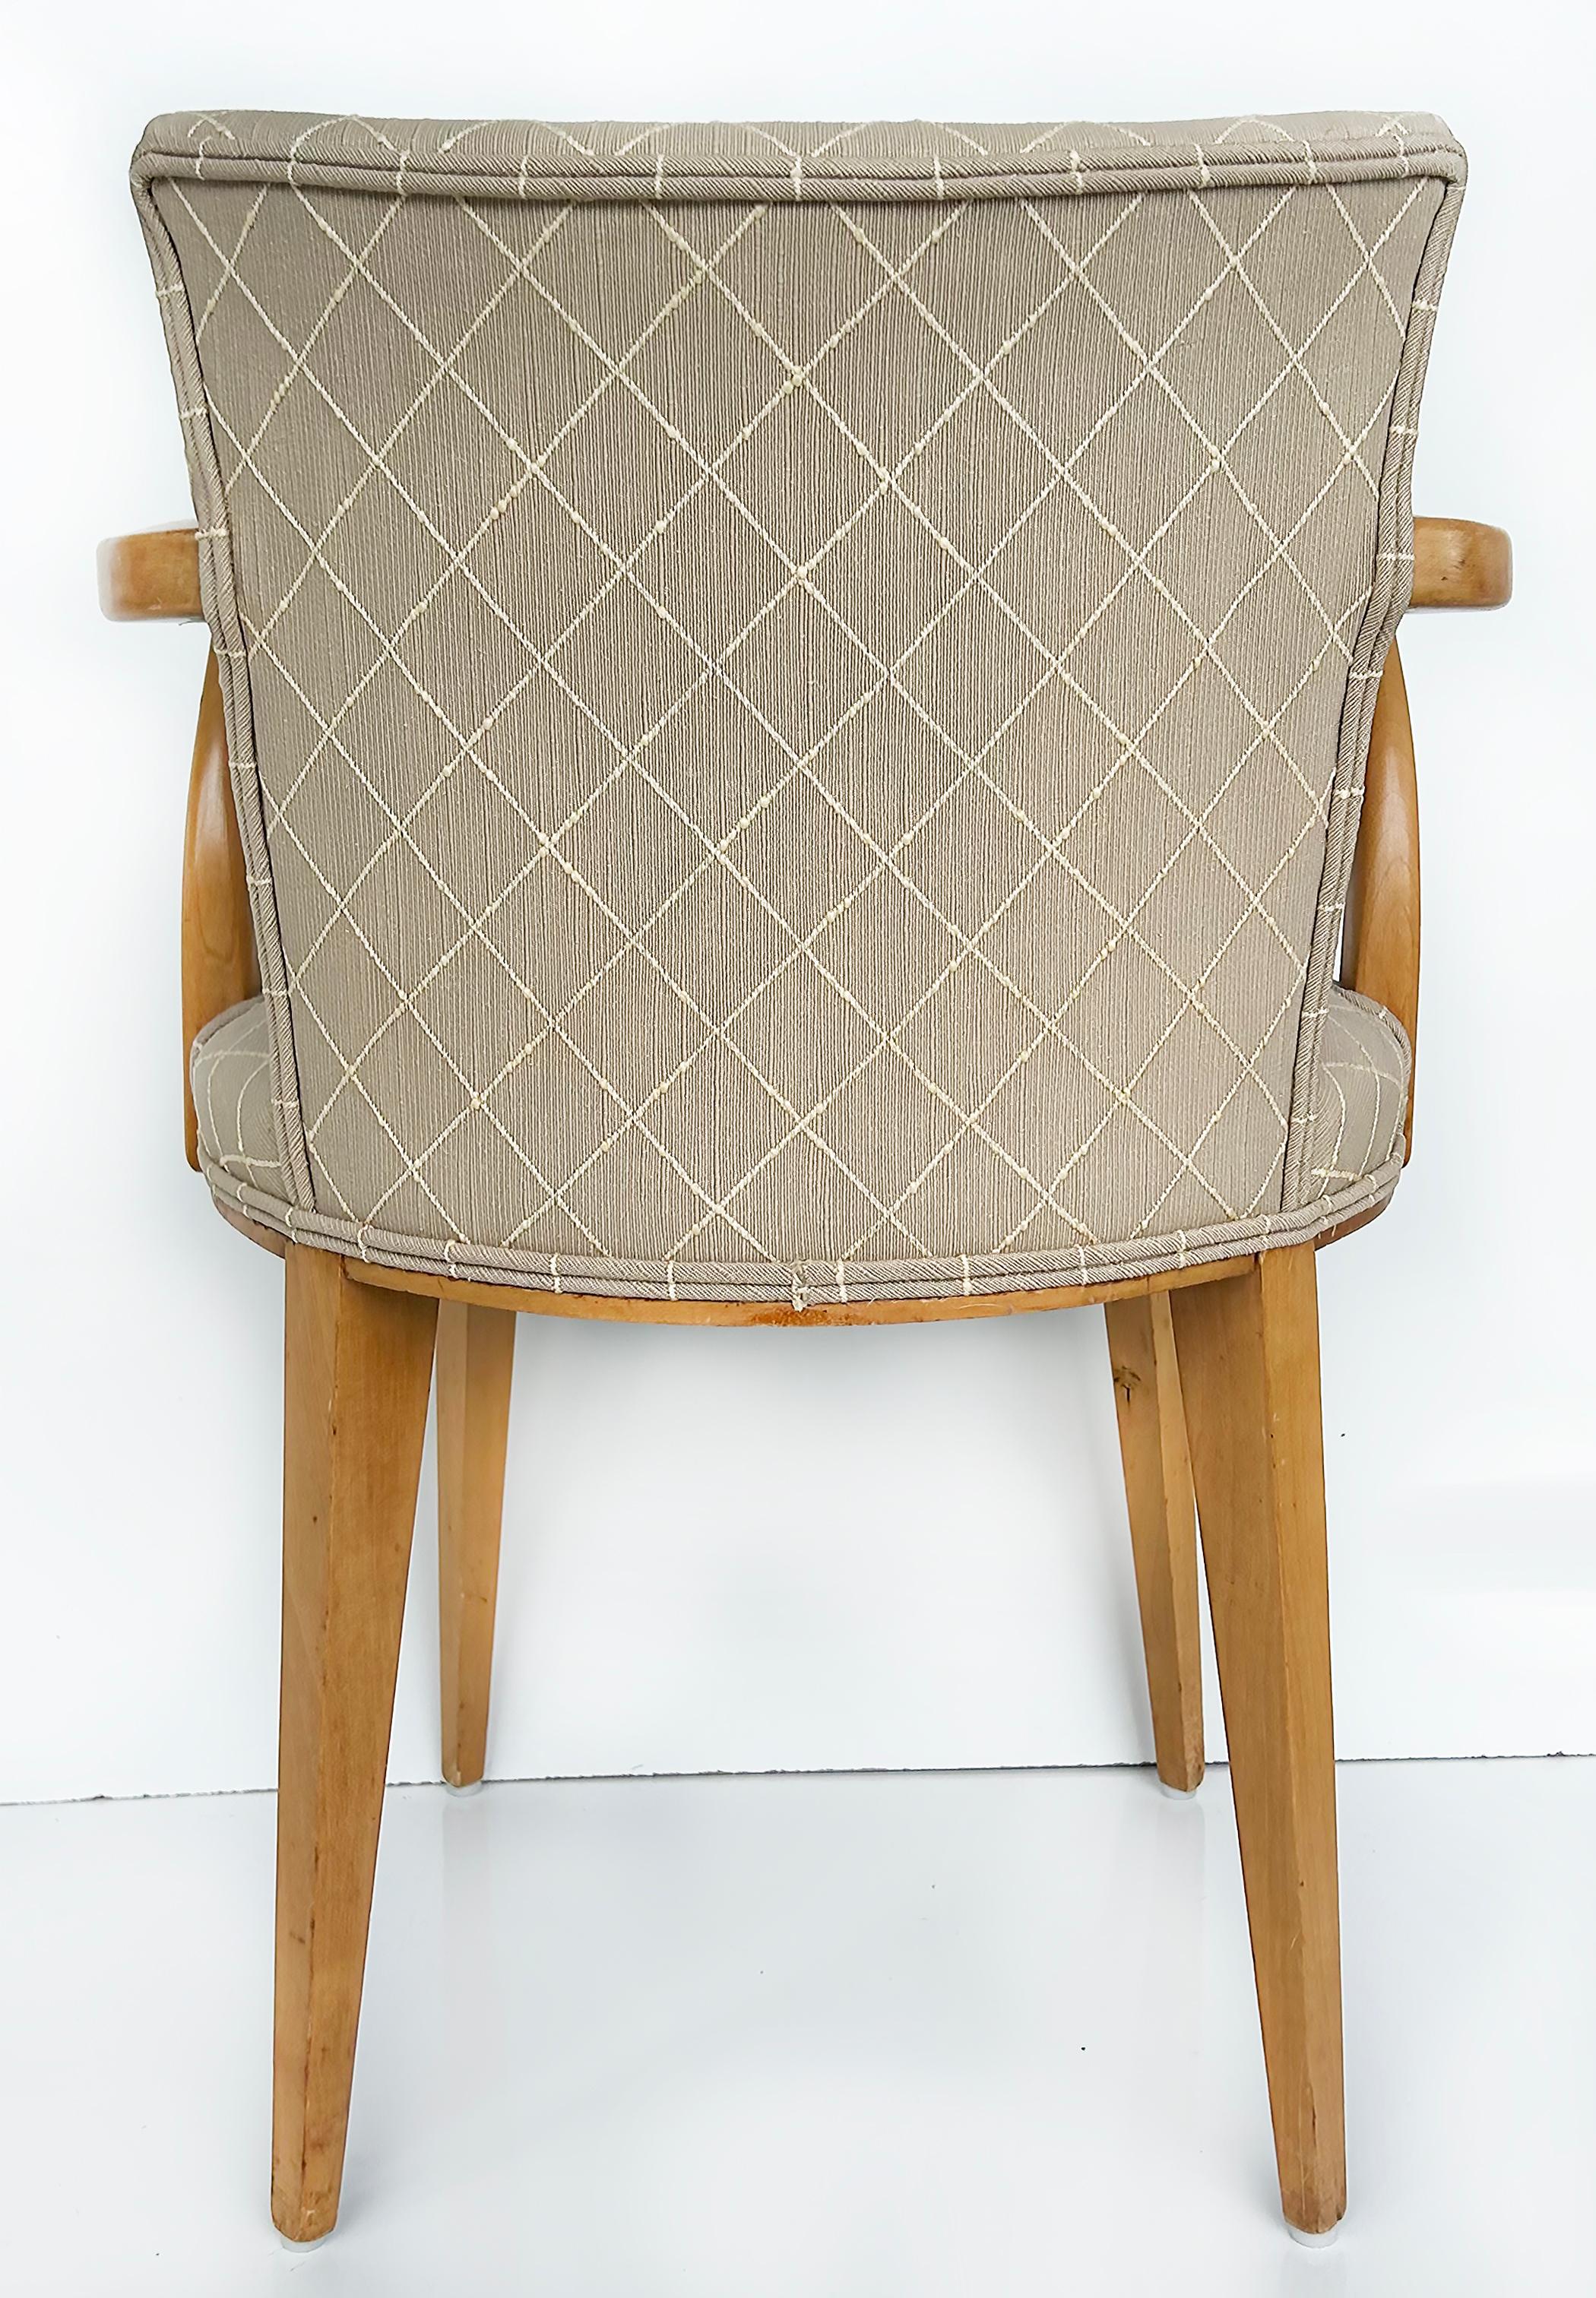 Fabric Sycamore Wood Upholstered Vanity or Desk Chair with Stylized Wood Arms and Legs For Sale